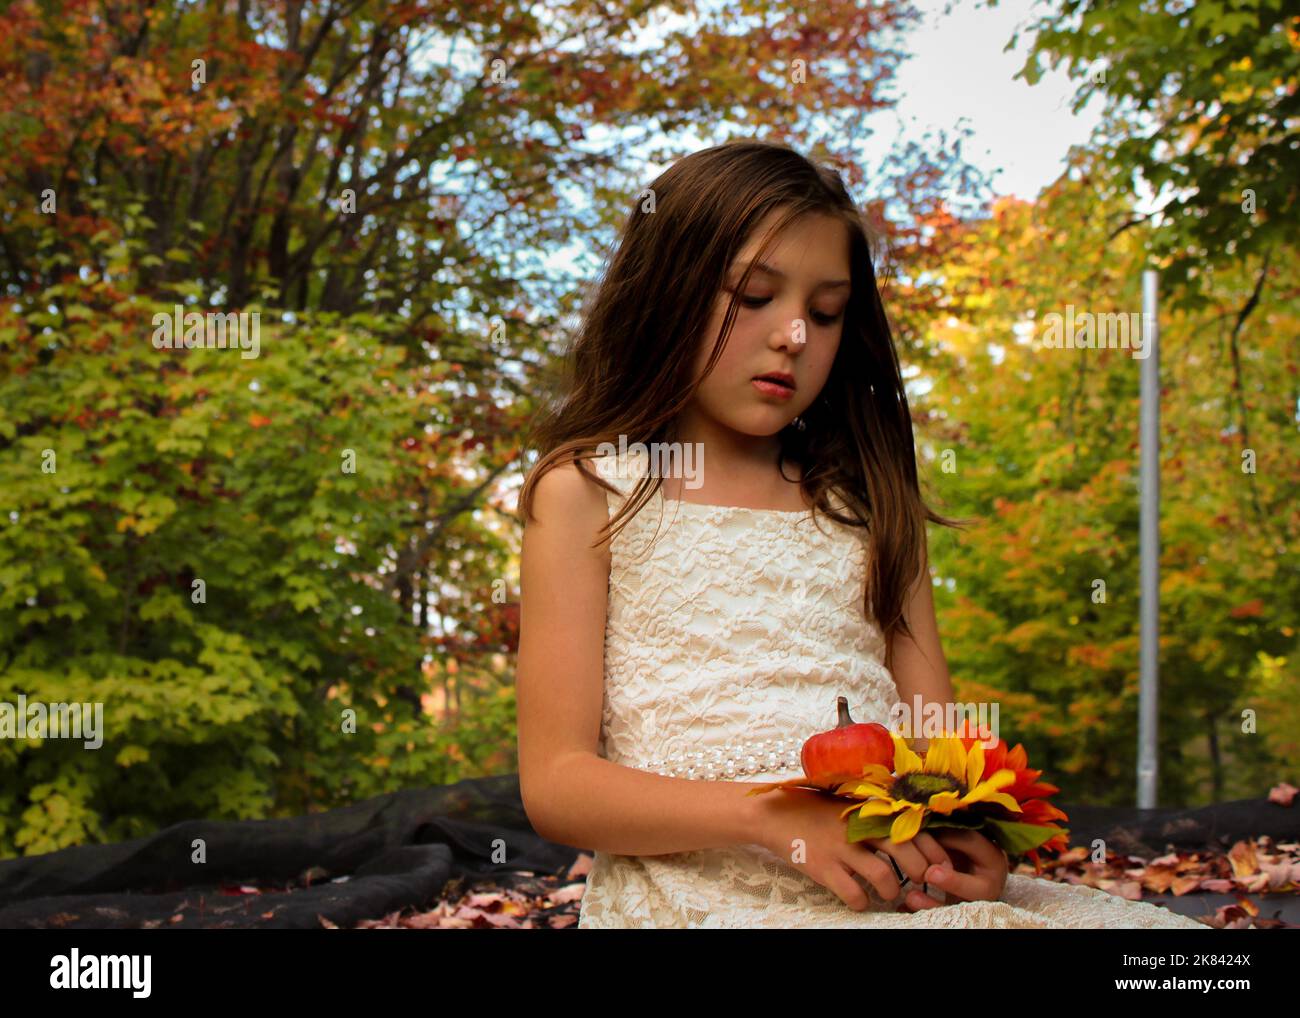 Beautiful young girl sitting on a trampoline holding sunflowers and a small pumpkin in Autumn Stock Photo